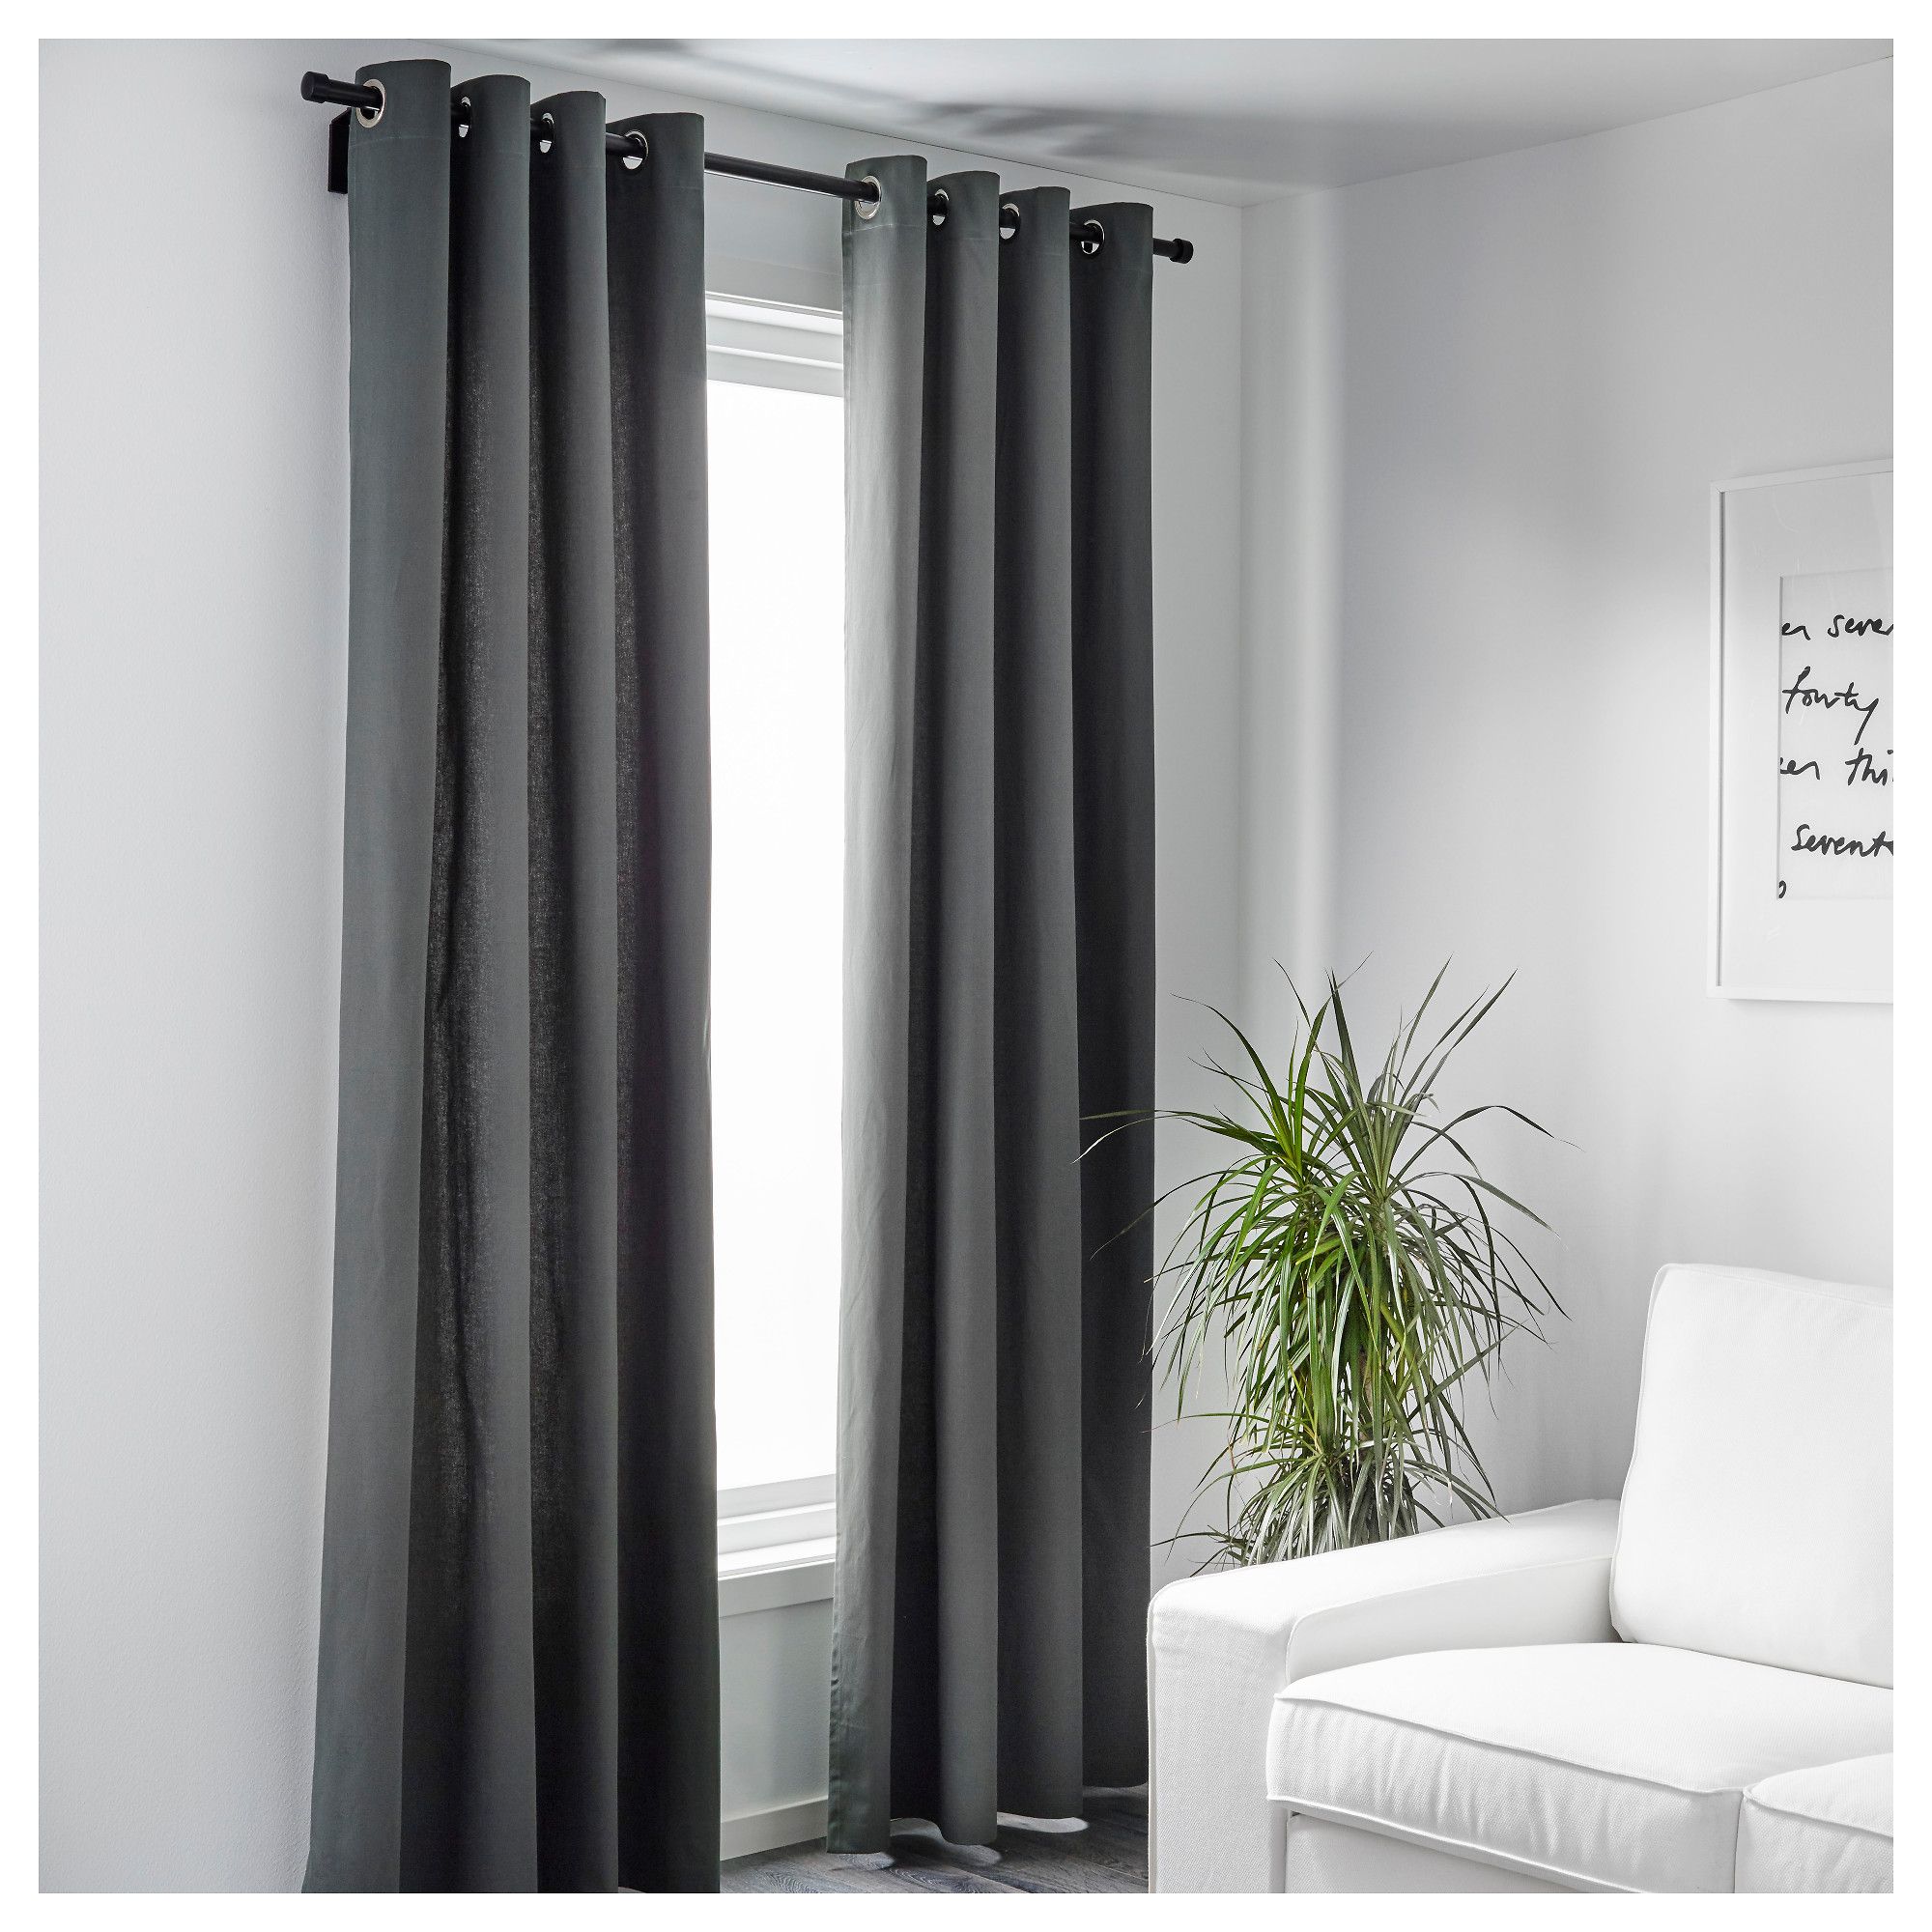 MERETE Curtains, 1 pair Grey 145x250 cm | Room ideas, Bedrooms and ...